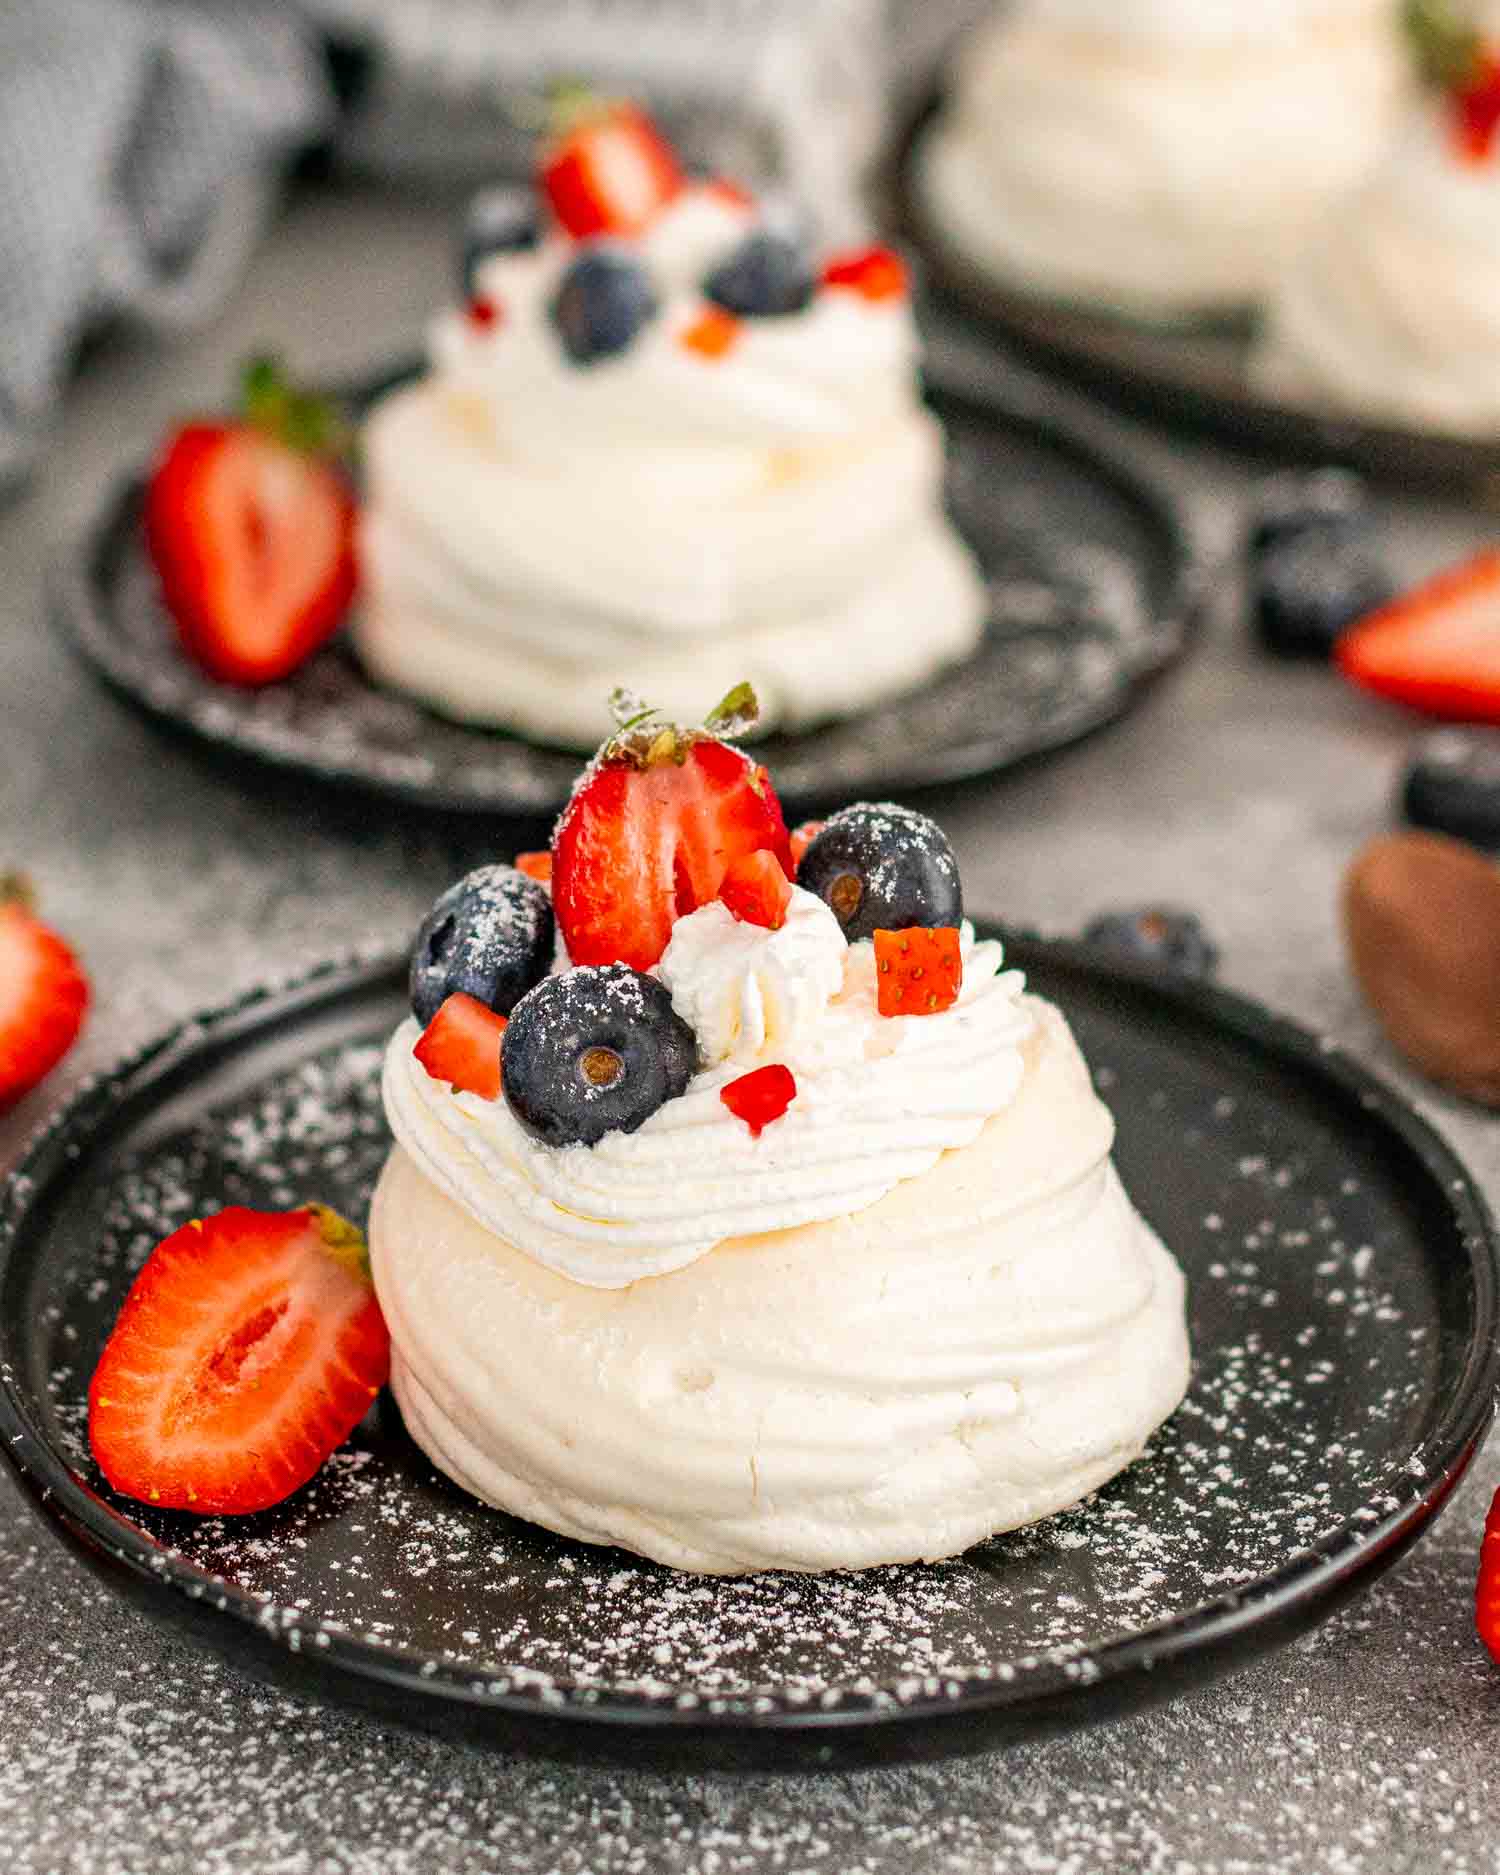 mini pavlova on a metal plate topped with whipped cream and berries.